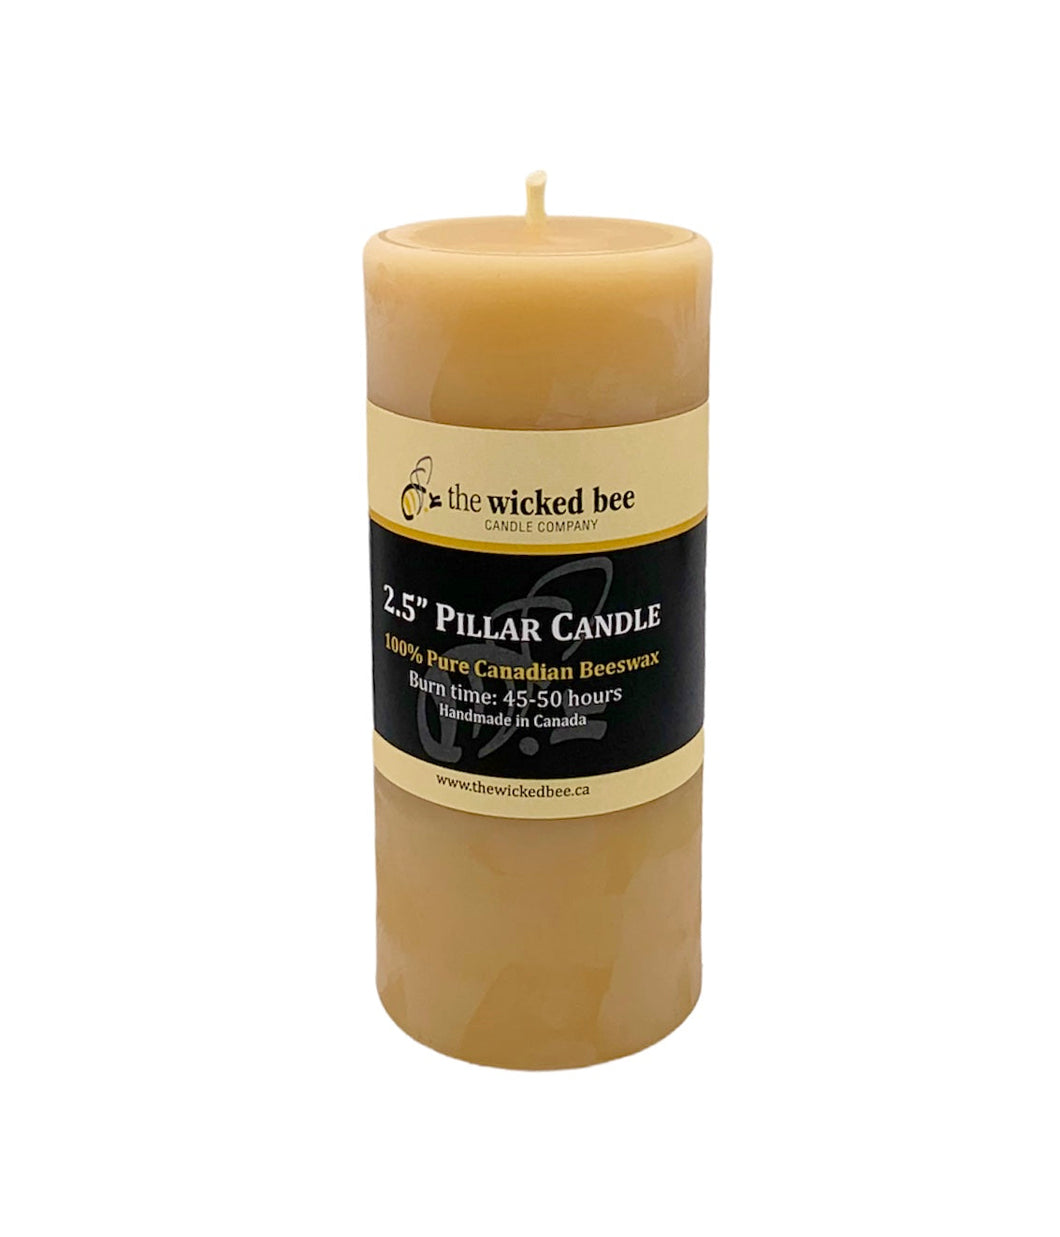 Beeswax Pillar Candle 2”wx 4”h (the wicked bee)